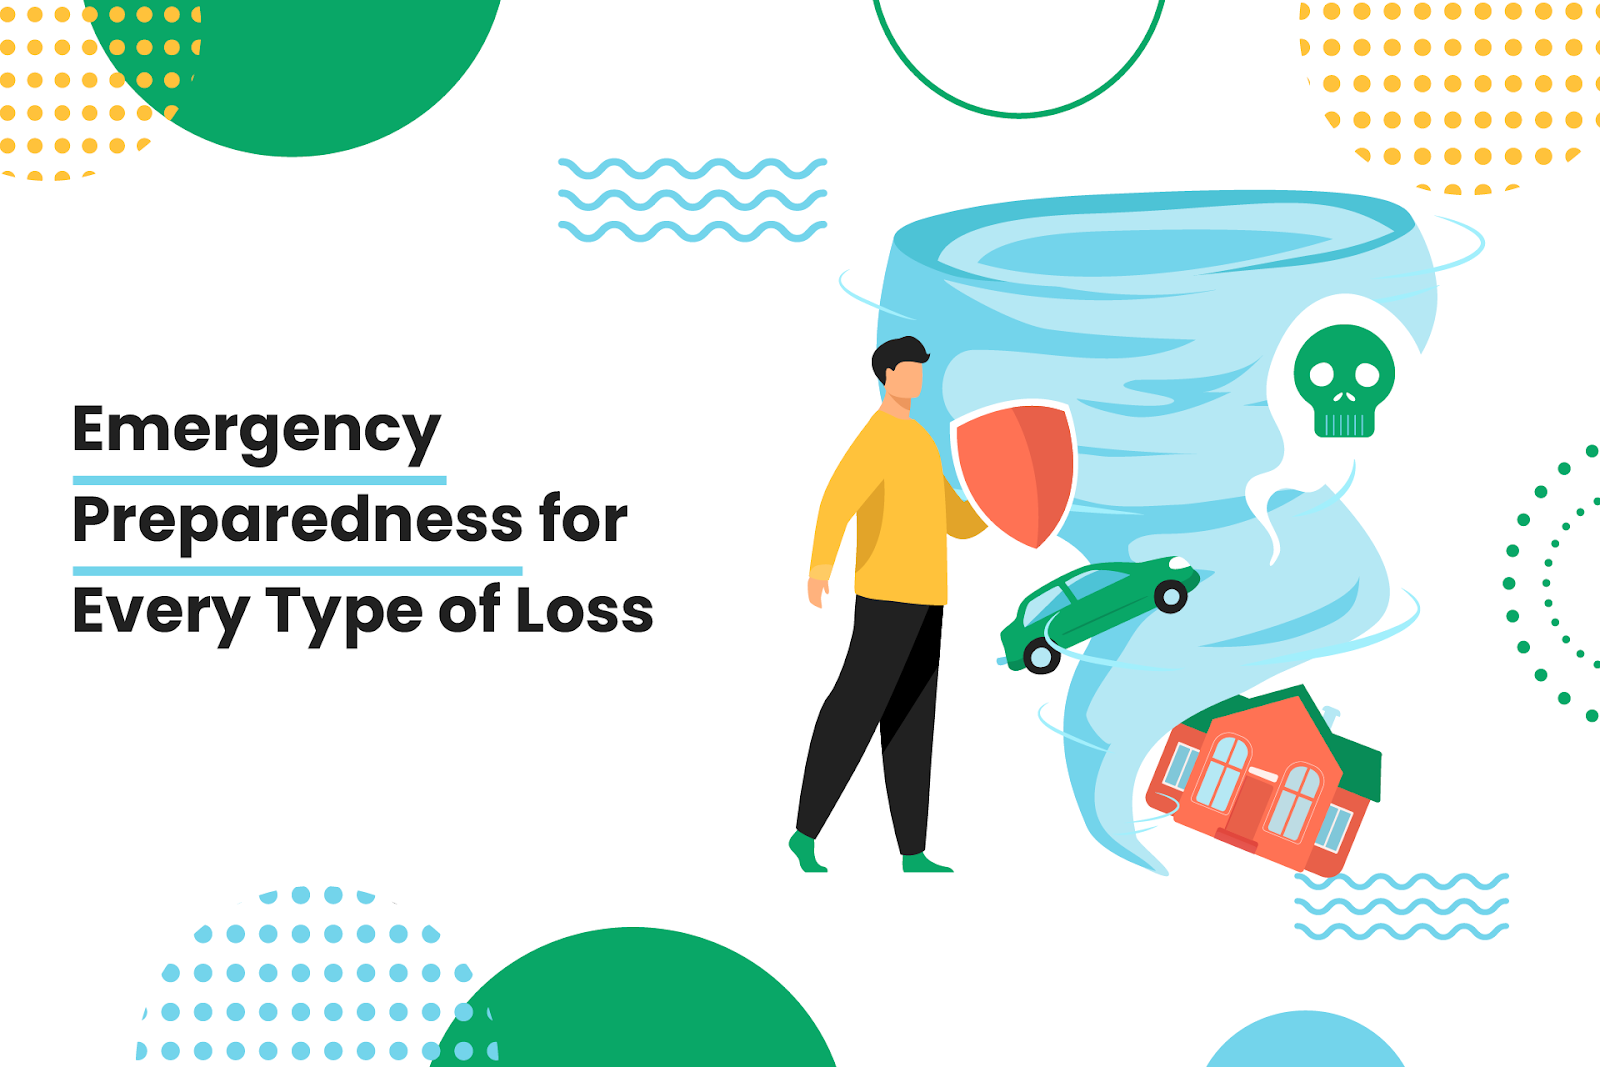 Emergency Preparedness for Every Type of Loss